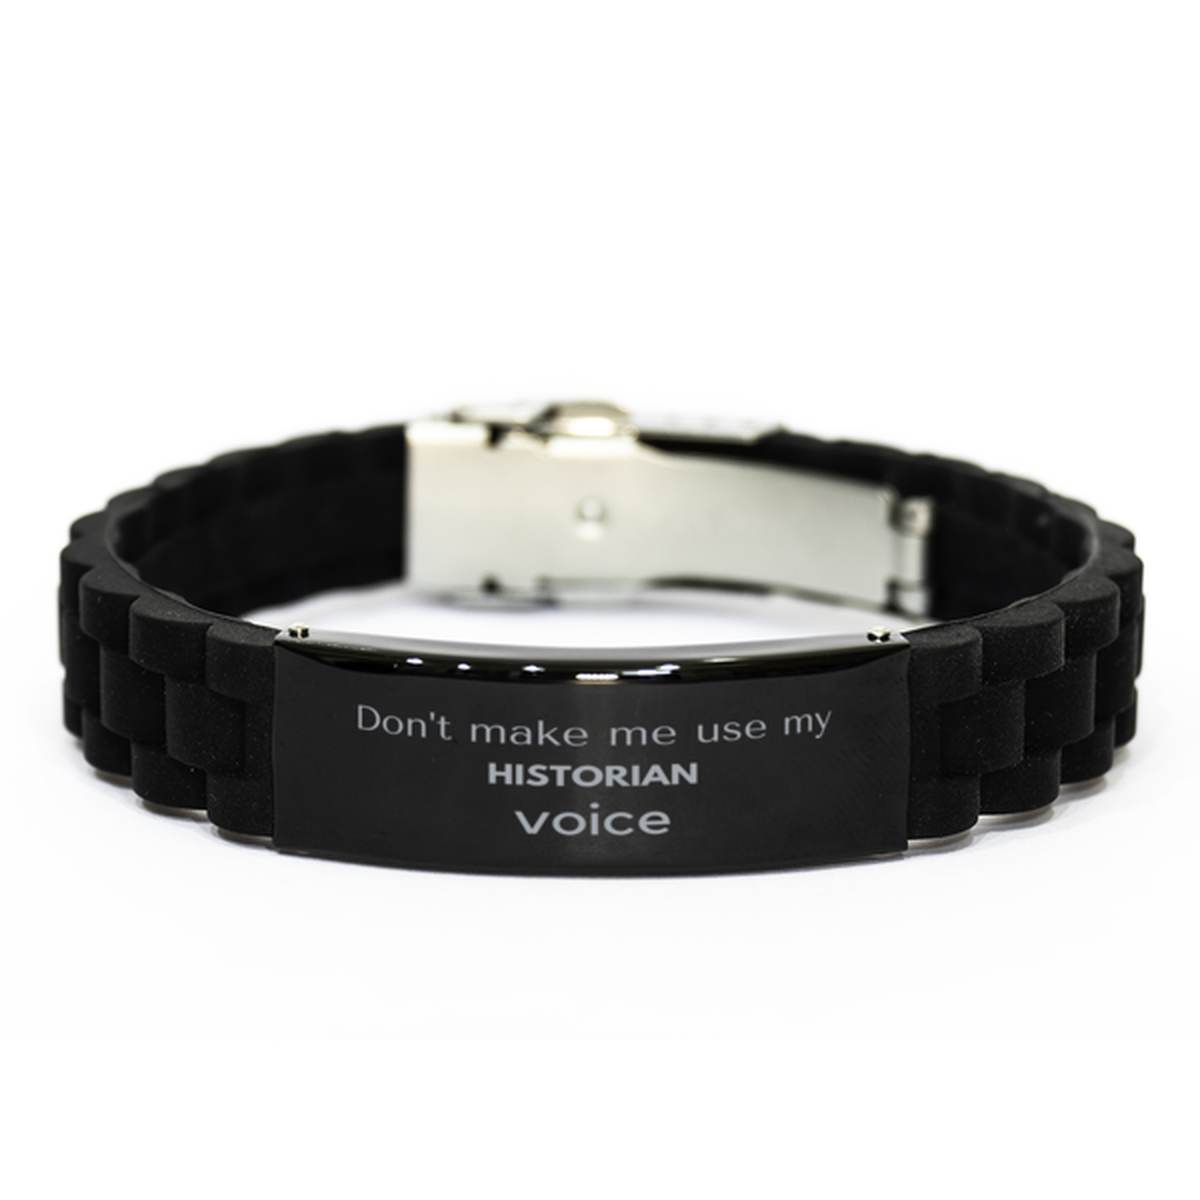 Don't make me use my Historian voice, Sarcasm Historian Gifts, Christmas Historian Black Glidelock Clasp Bracelet Birthday Unique Gifts For Historian Coworkers, Men, Women, Colleague, Friends